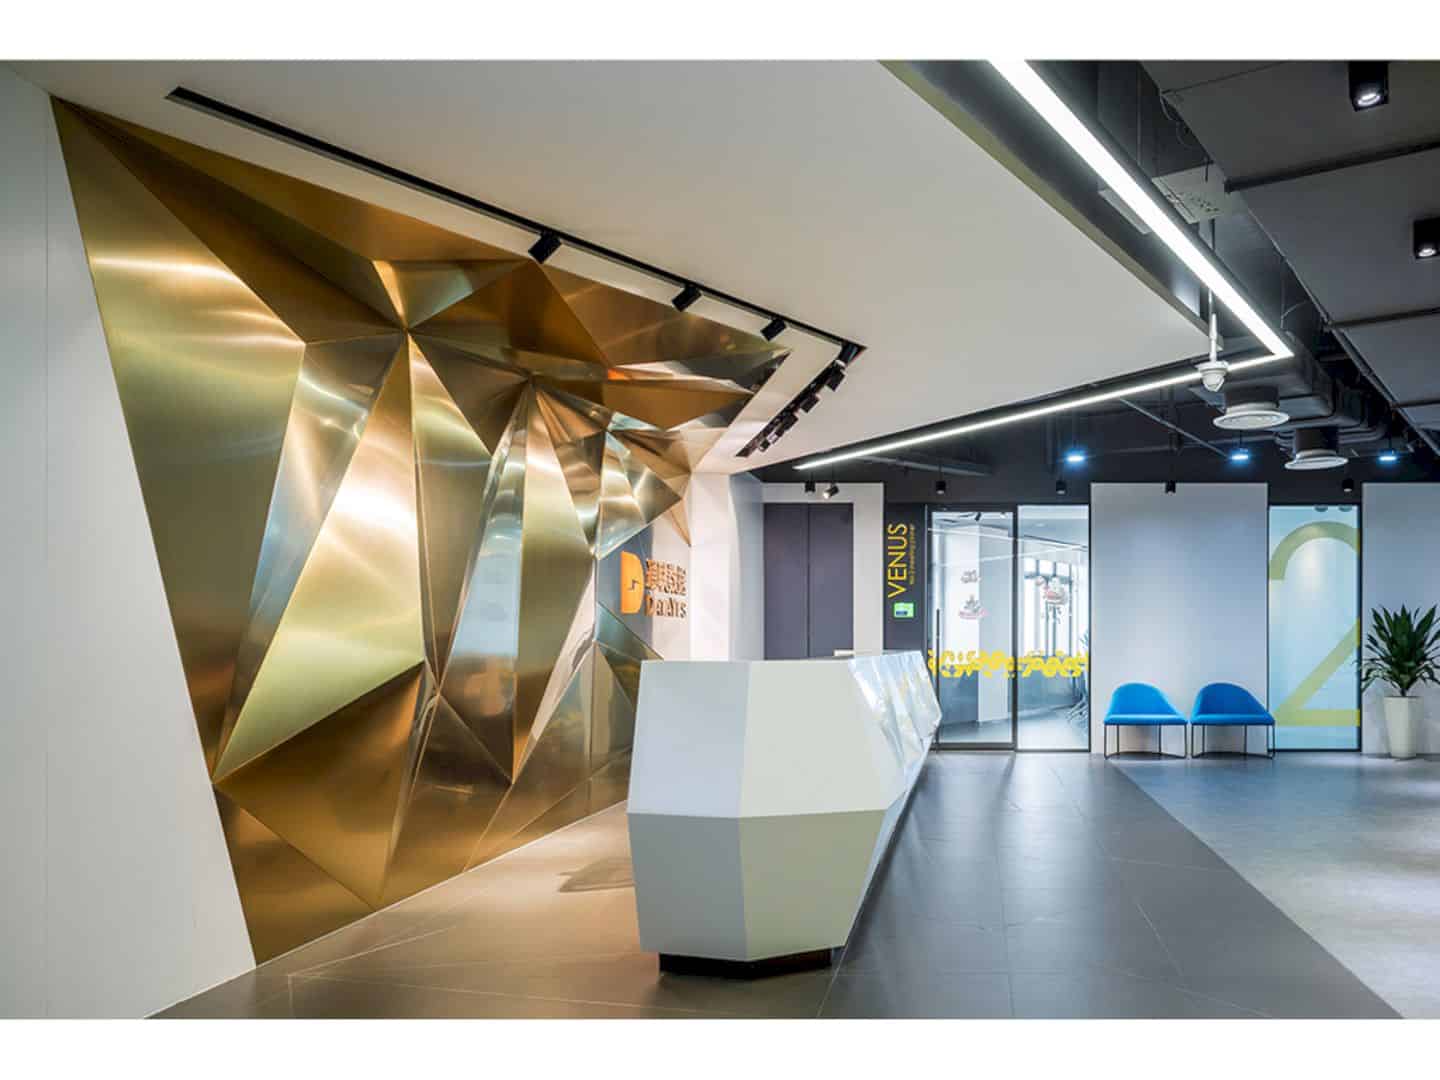 Datayes Office A Cutting Edge Internet Company With Fashionable Design 8